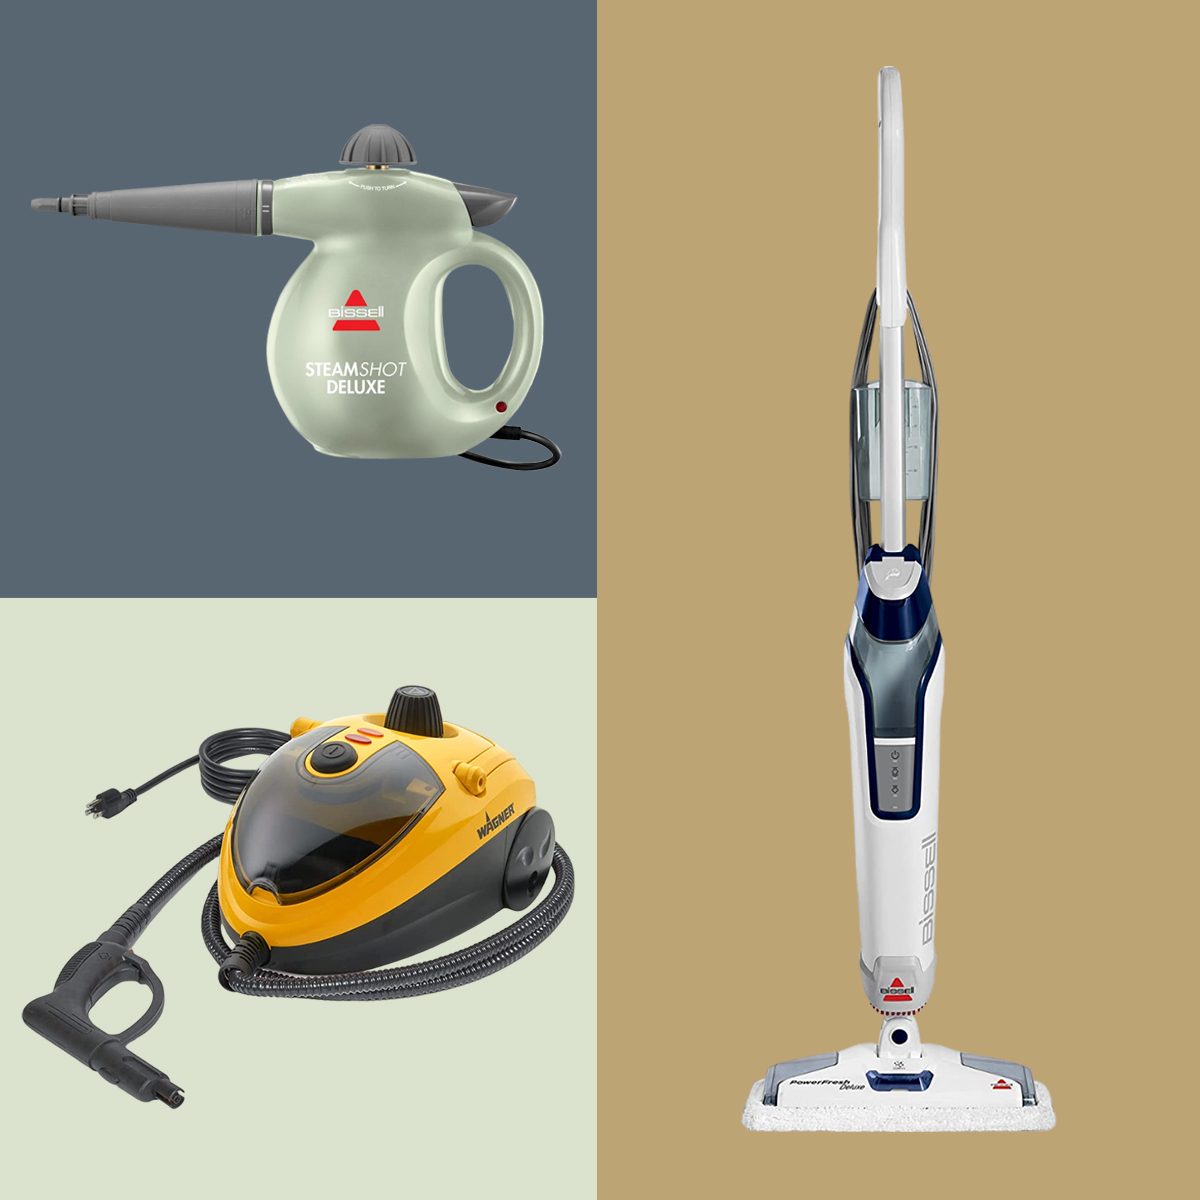 3 Best Steam Cleaner For Tile Floors And Grout in 2023 